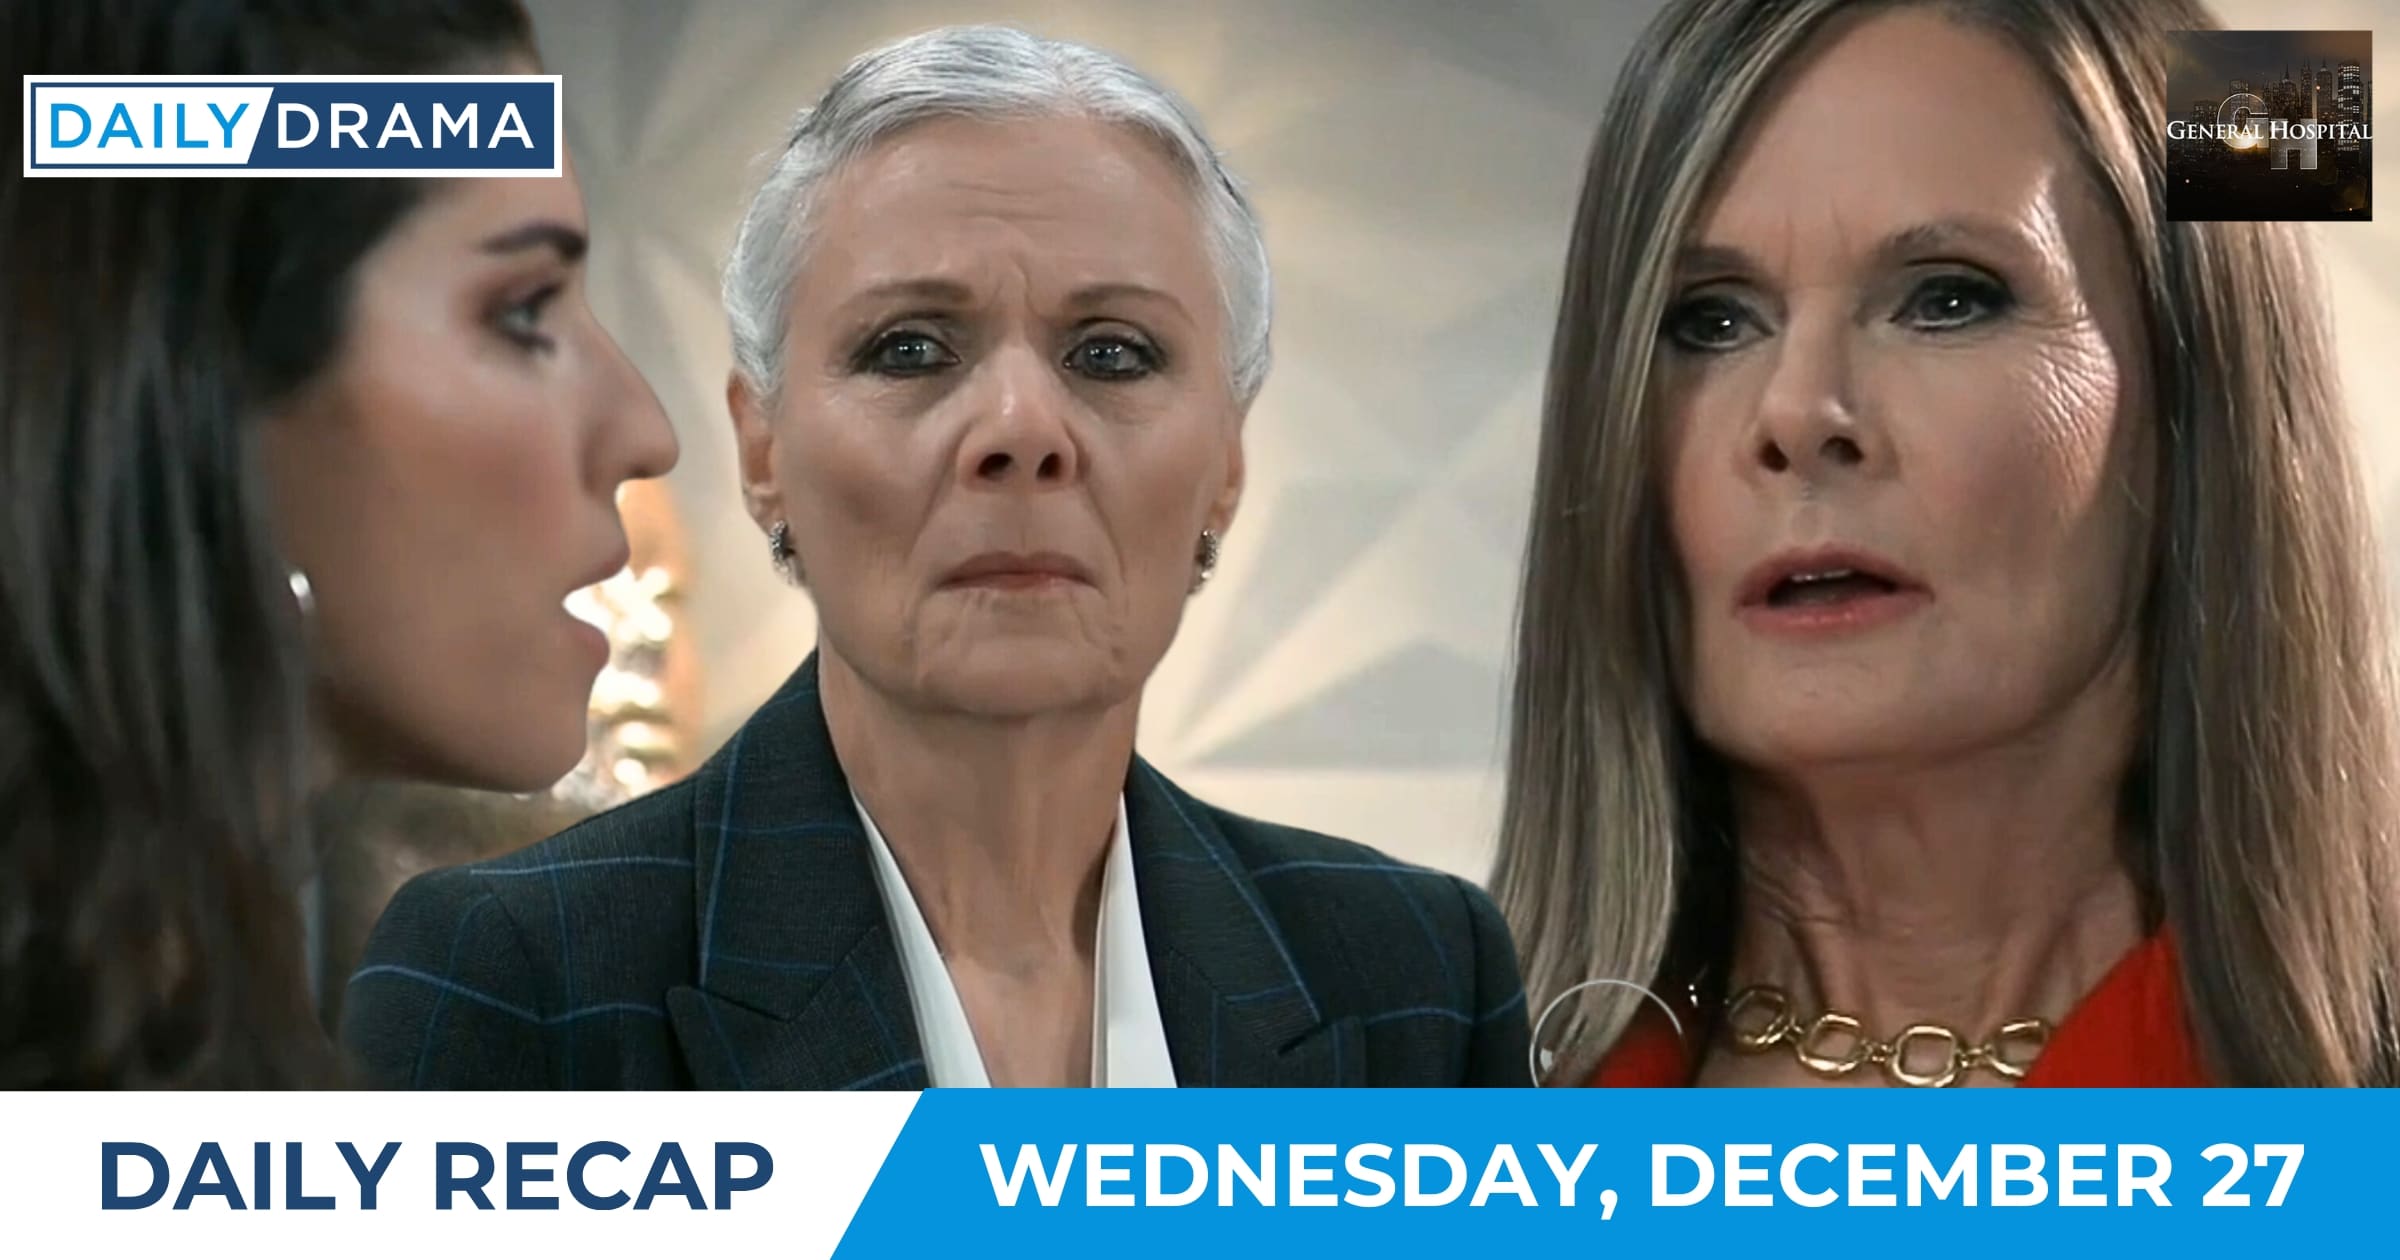 General Hospital Daily Recap - Dec 27 - Brook Lynn Tracy and Lucy